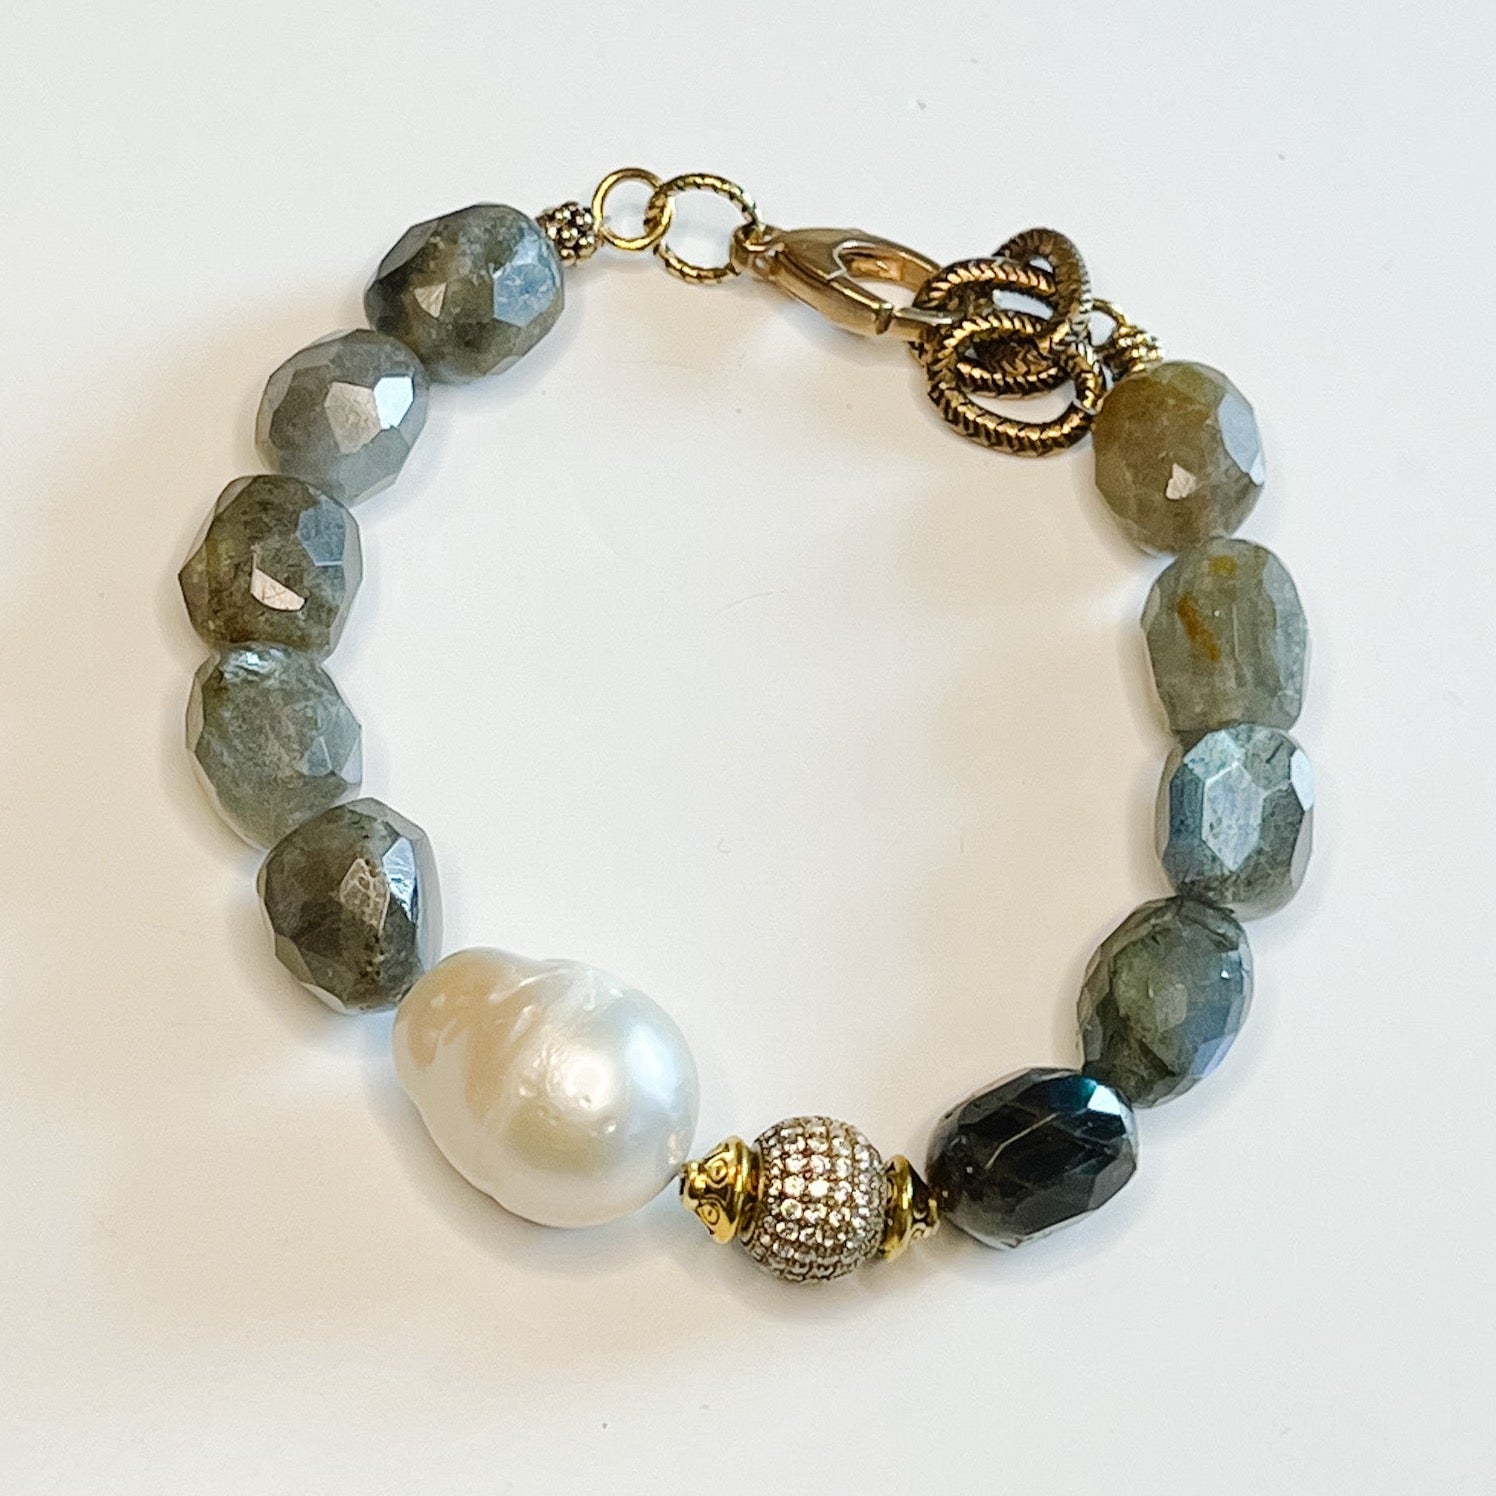 Bracelet, Ida - Danshire Market and Design, beaded bracelet, gold accents, gray beads, pearl stone and an embellished ball